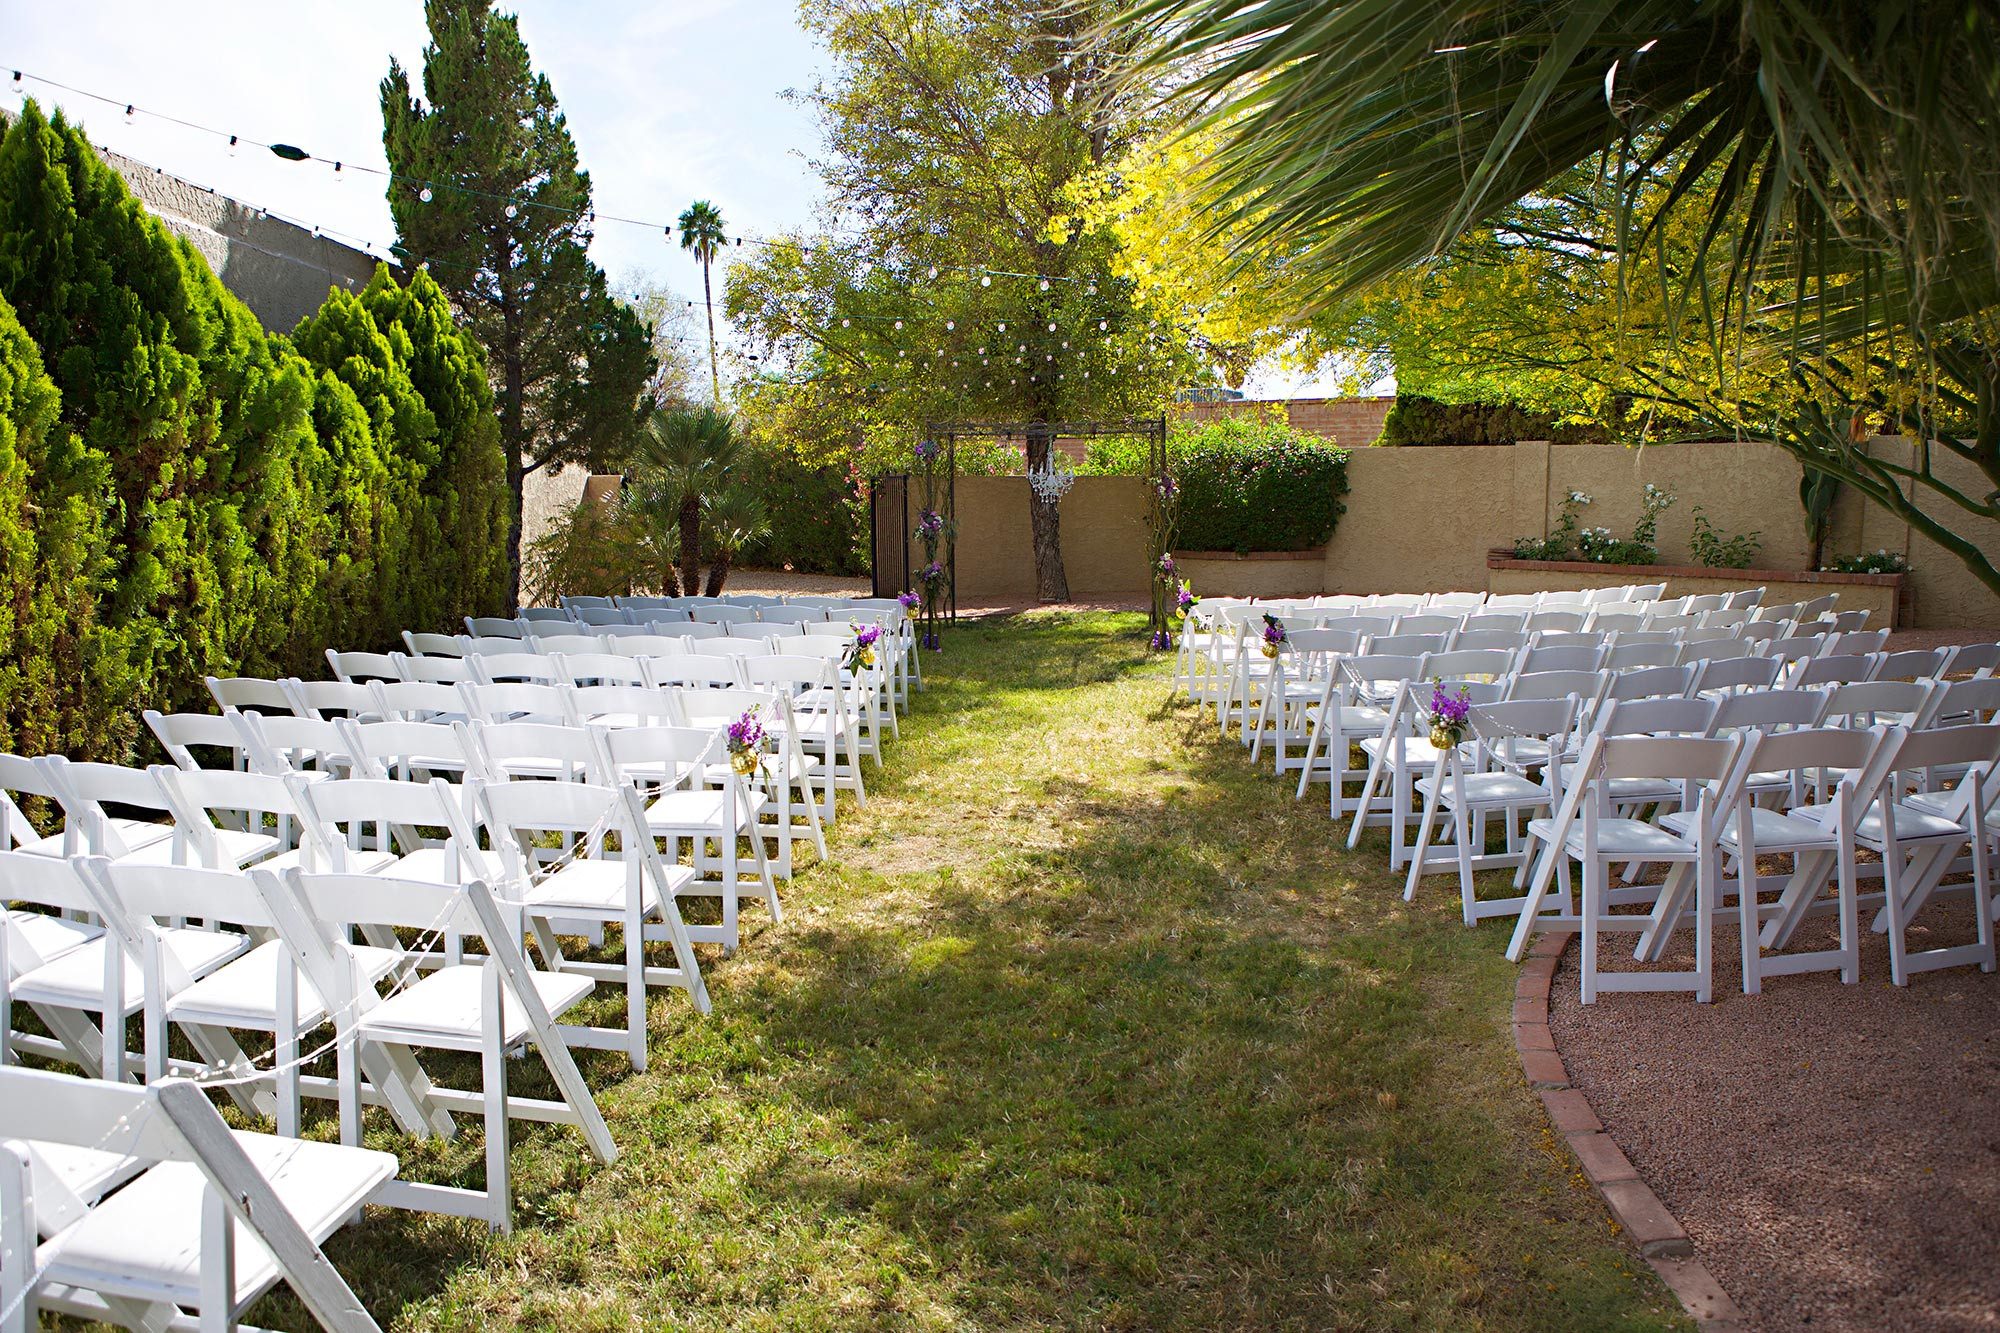 Cheap Wedding Venues
 Top 25 Cheap Wedding Venue Ideas for Ceremony on a Bud